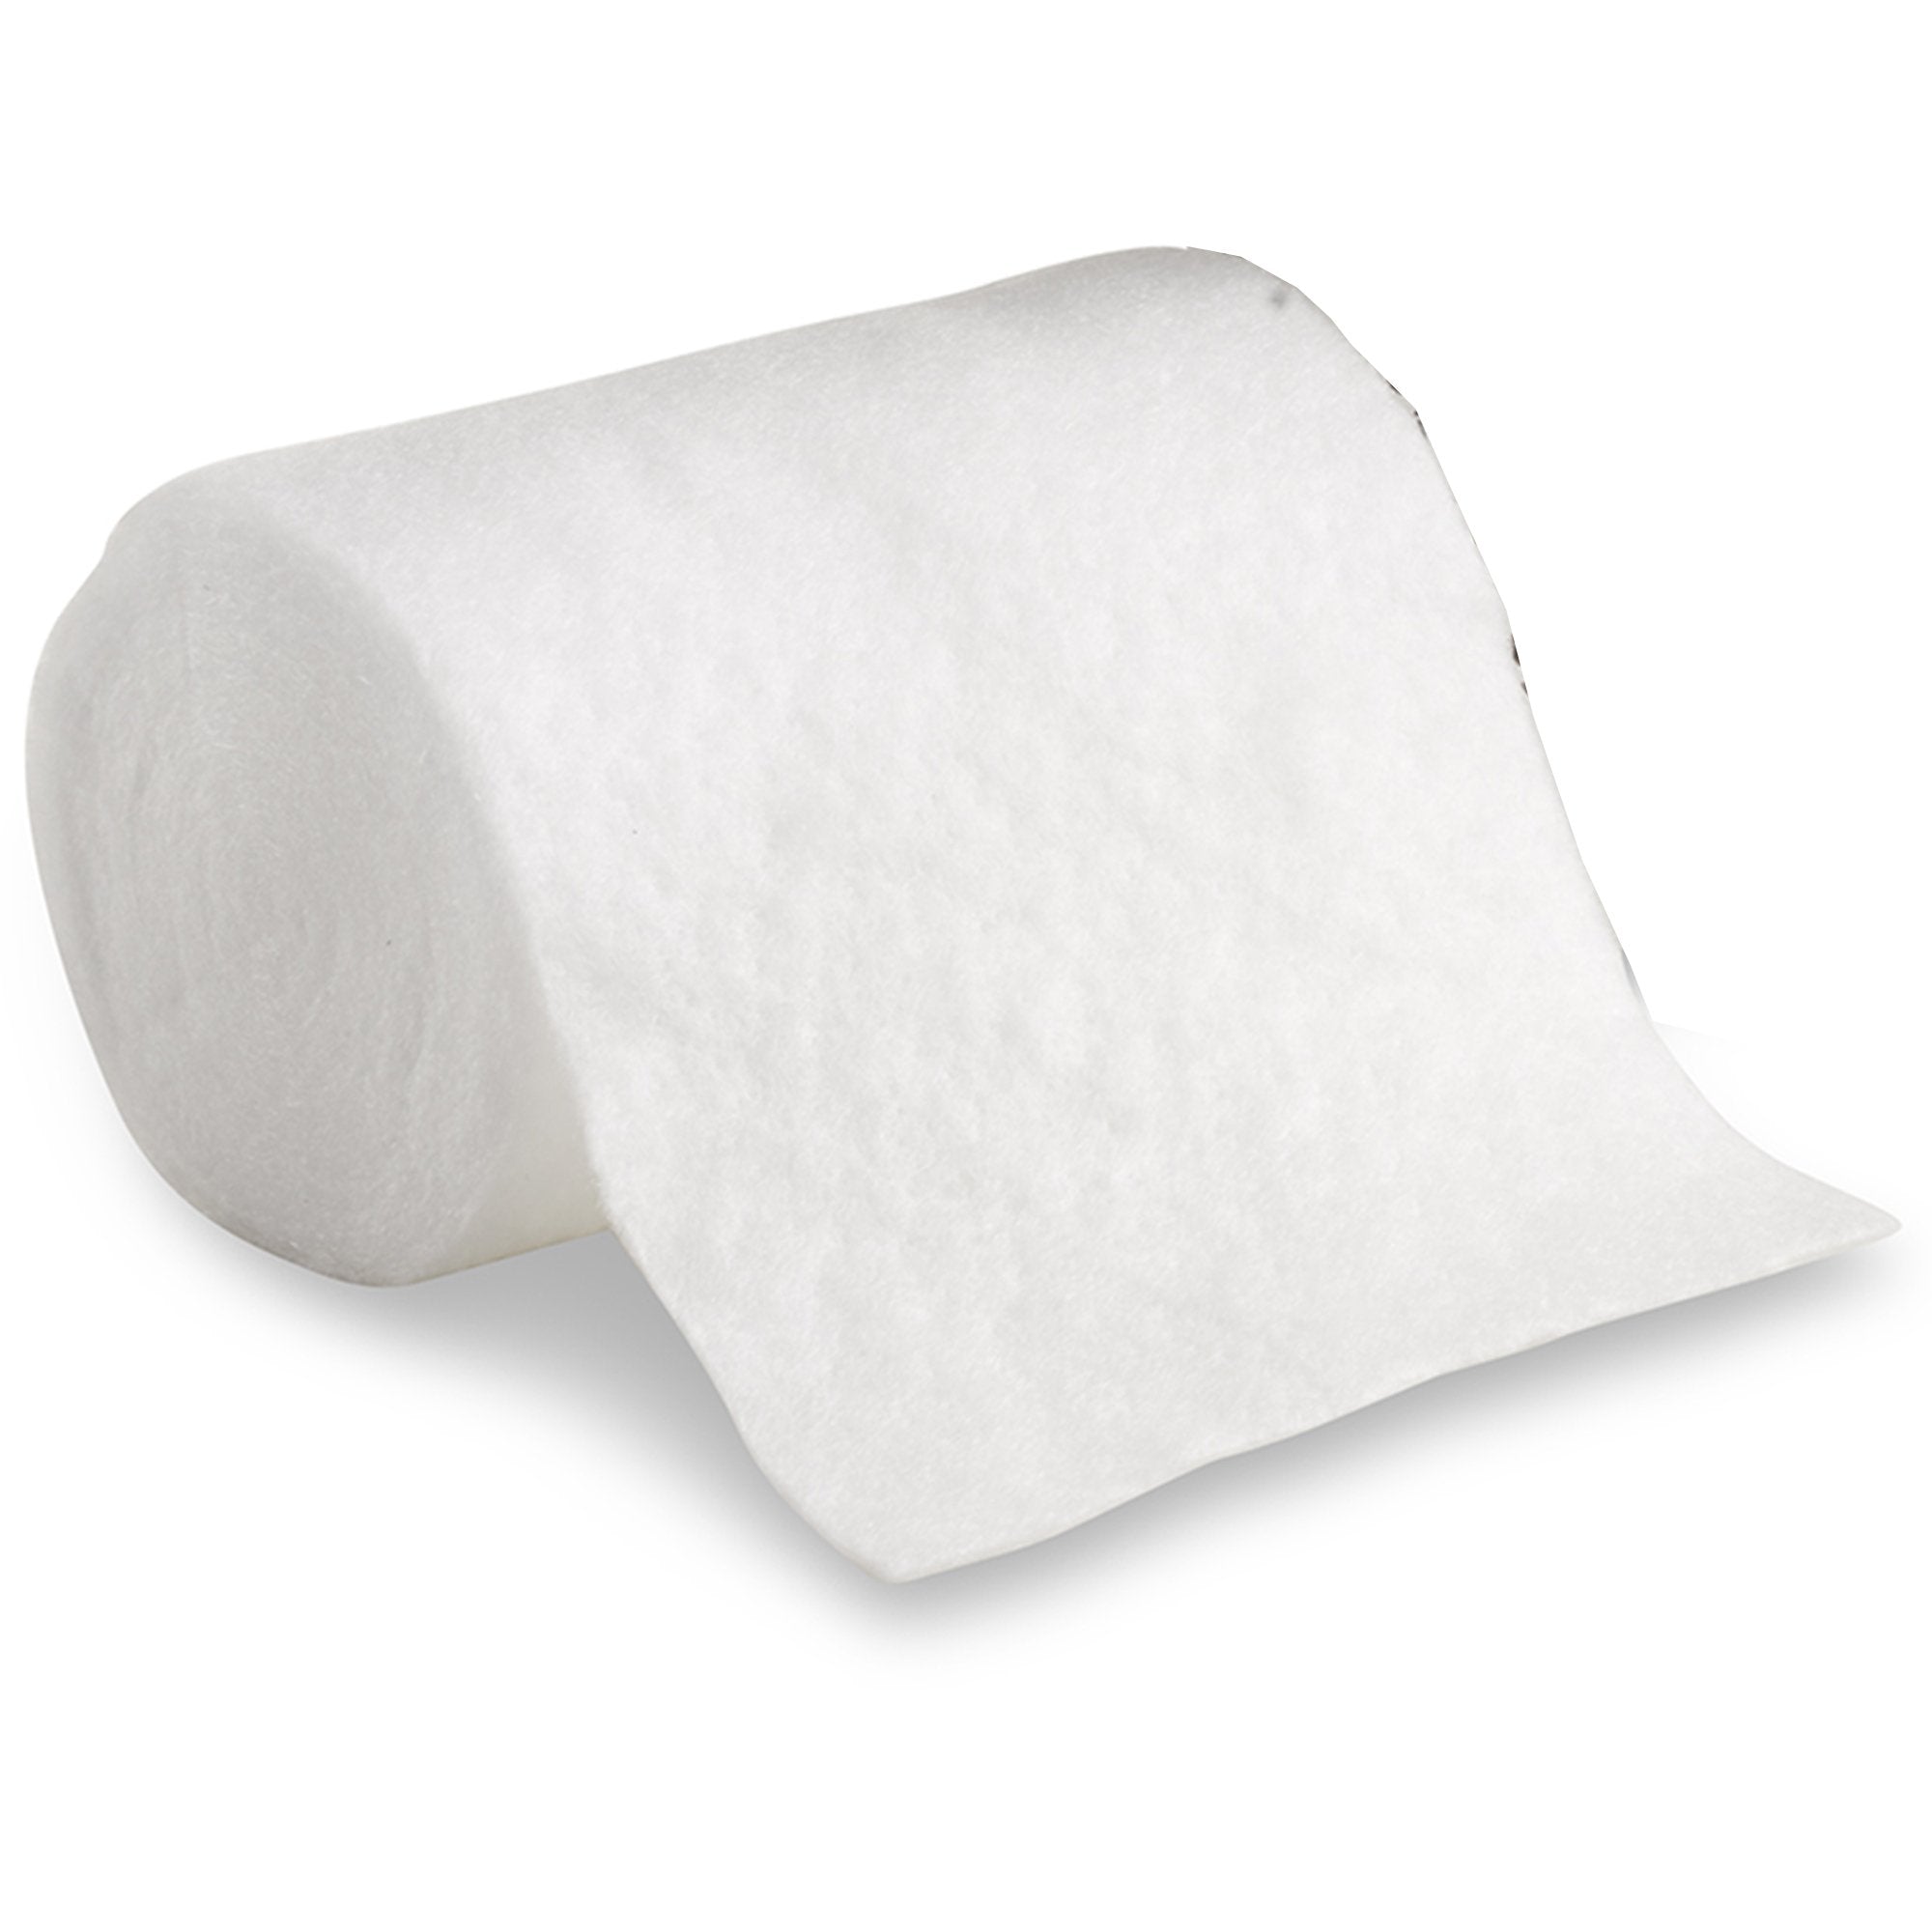 Cast Padding Water Resistant 3M™ Scotchcast™ Wet or Dry 4 Inch X 4 Yard Polypropylene / Polyethylene Knit / Nonwoven Fibers NonSterile